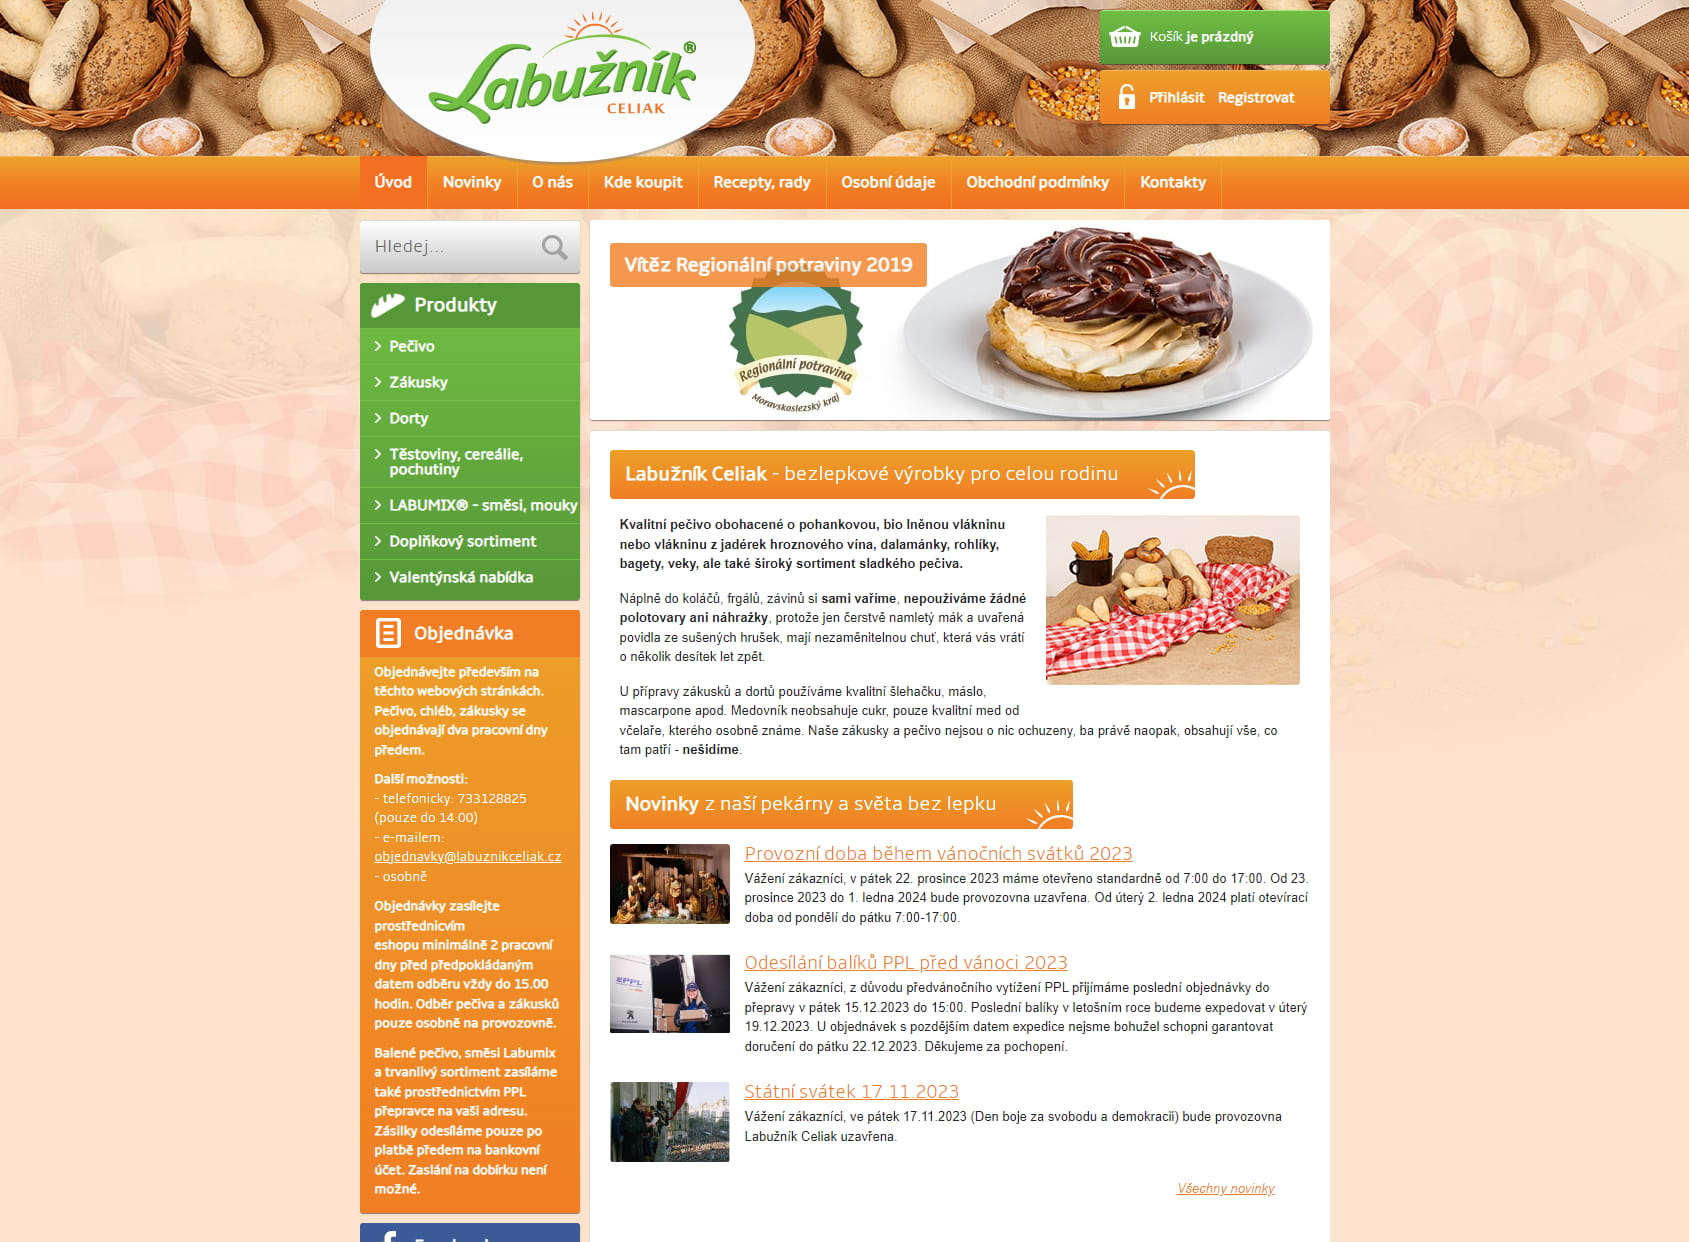 Gourmet Celiak, Confectionery and Bakery Gluten free